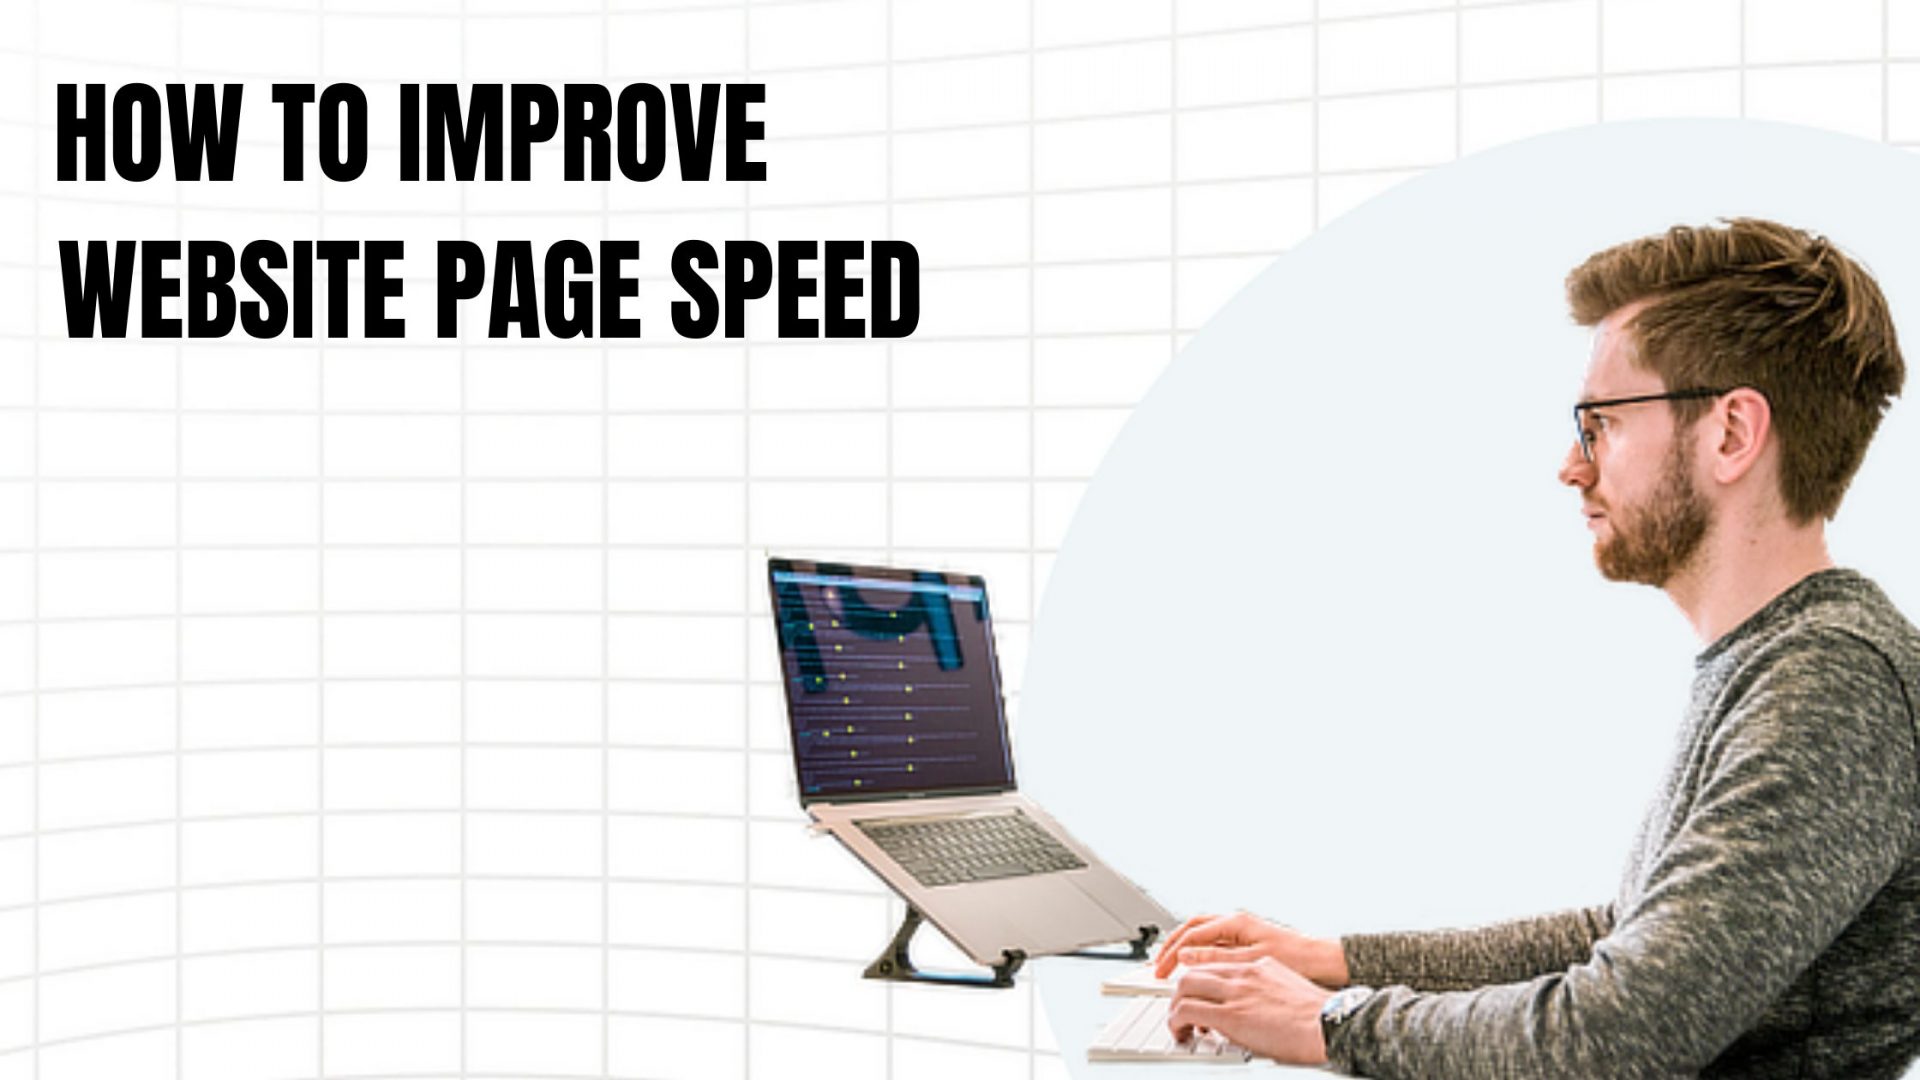 HOW TO IMPROVE WEBSITE PAGE SPEED